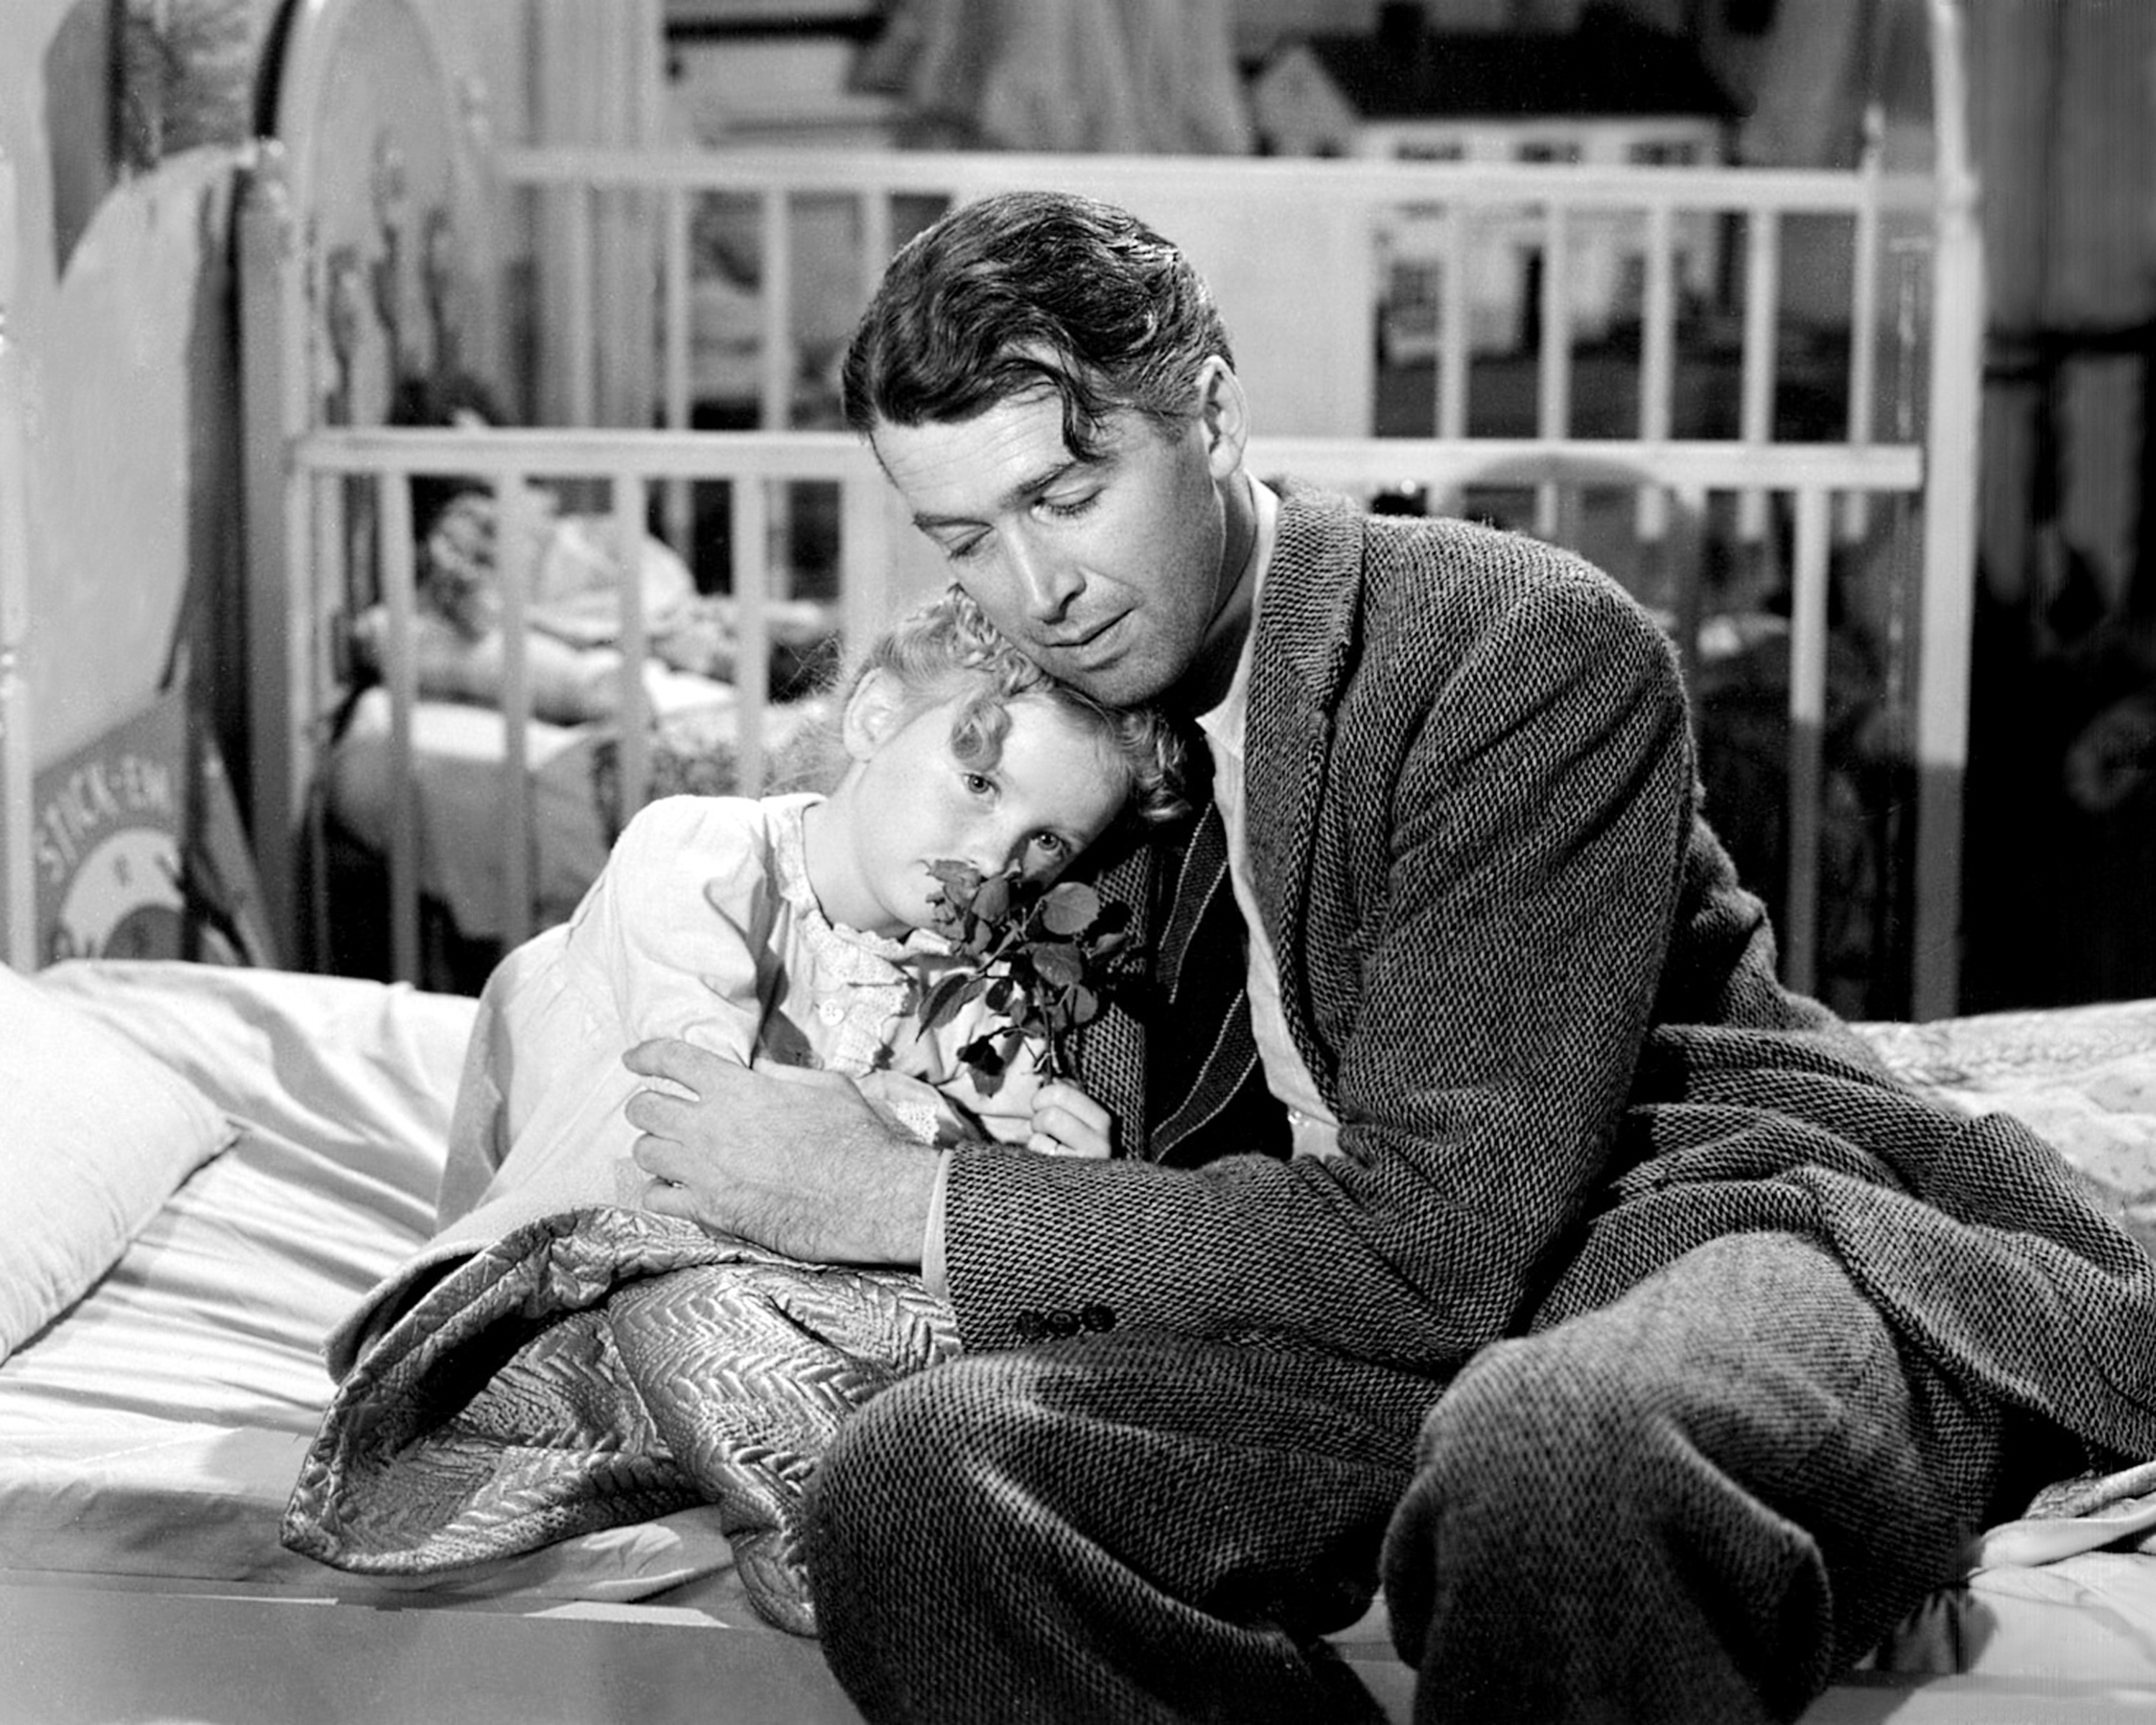 American actors James Stewart (1908 - 1997), as George Bailey, and Karolyn Grimes as his daughter Zuzu, in a scene from 'It's a Wonderful Life', directed by Frank Capra, 1946. (Getty Images)